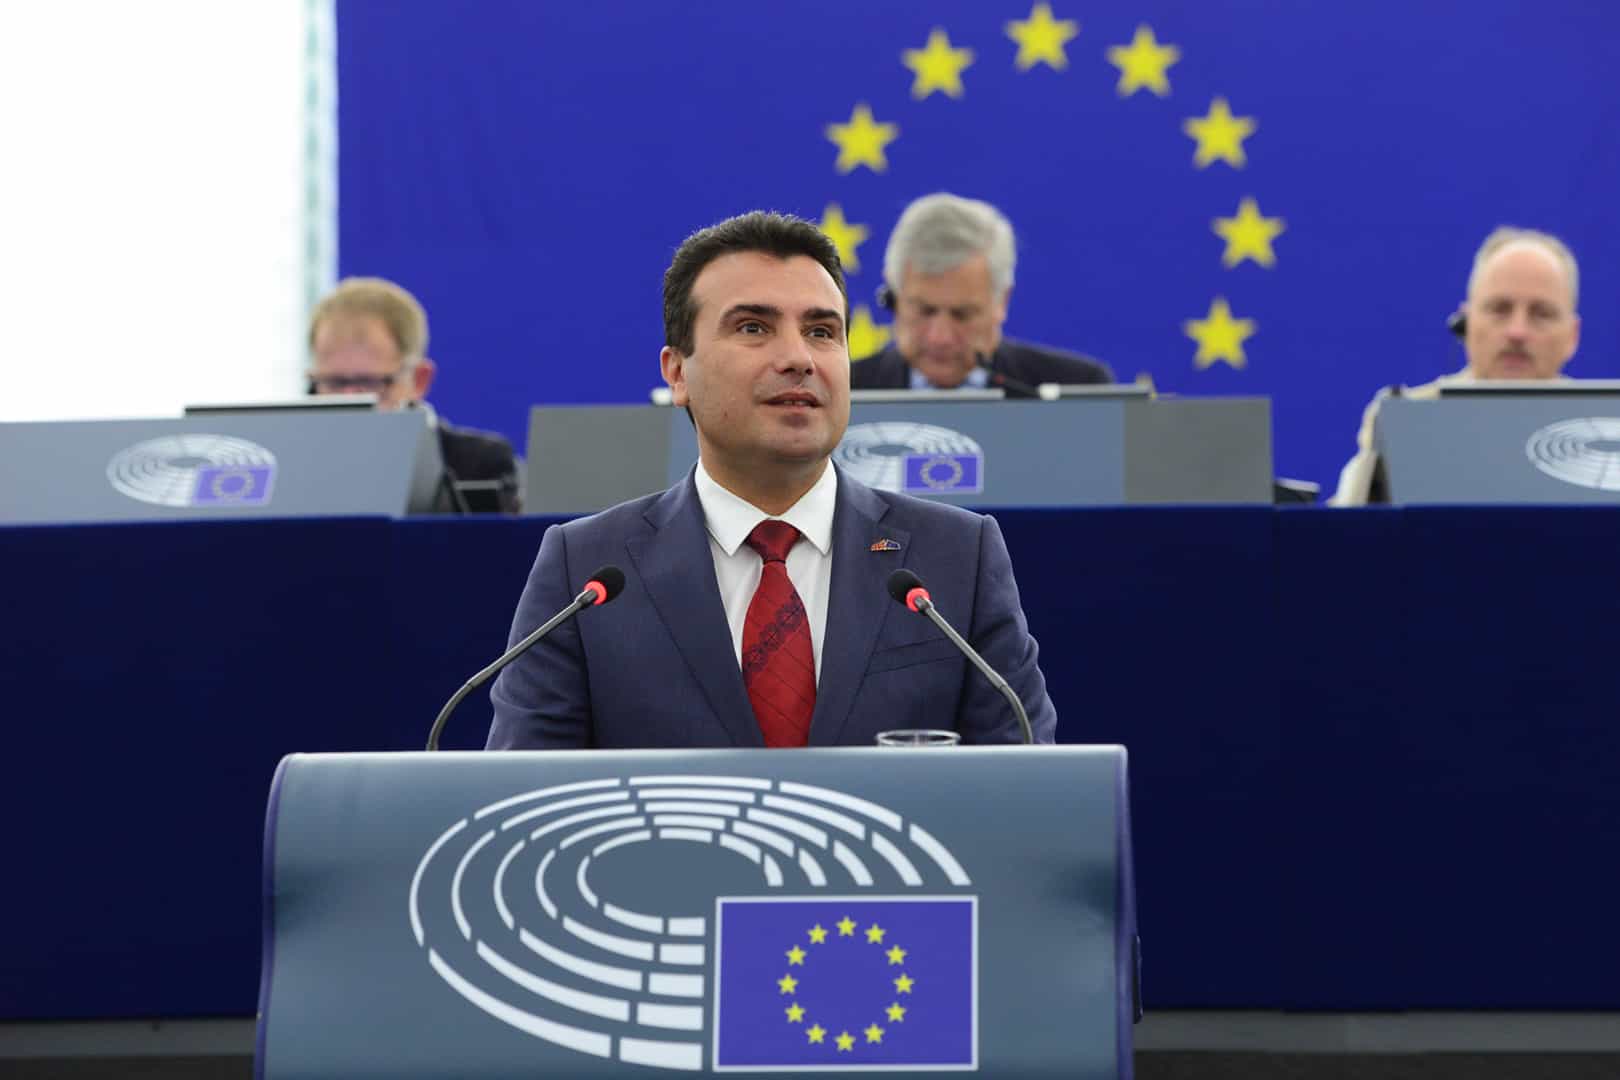 FYROM wants to be part of the European family: Zaev 2